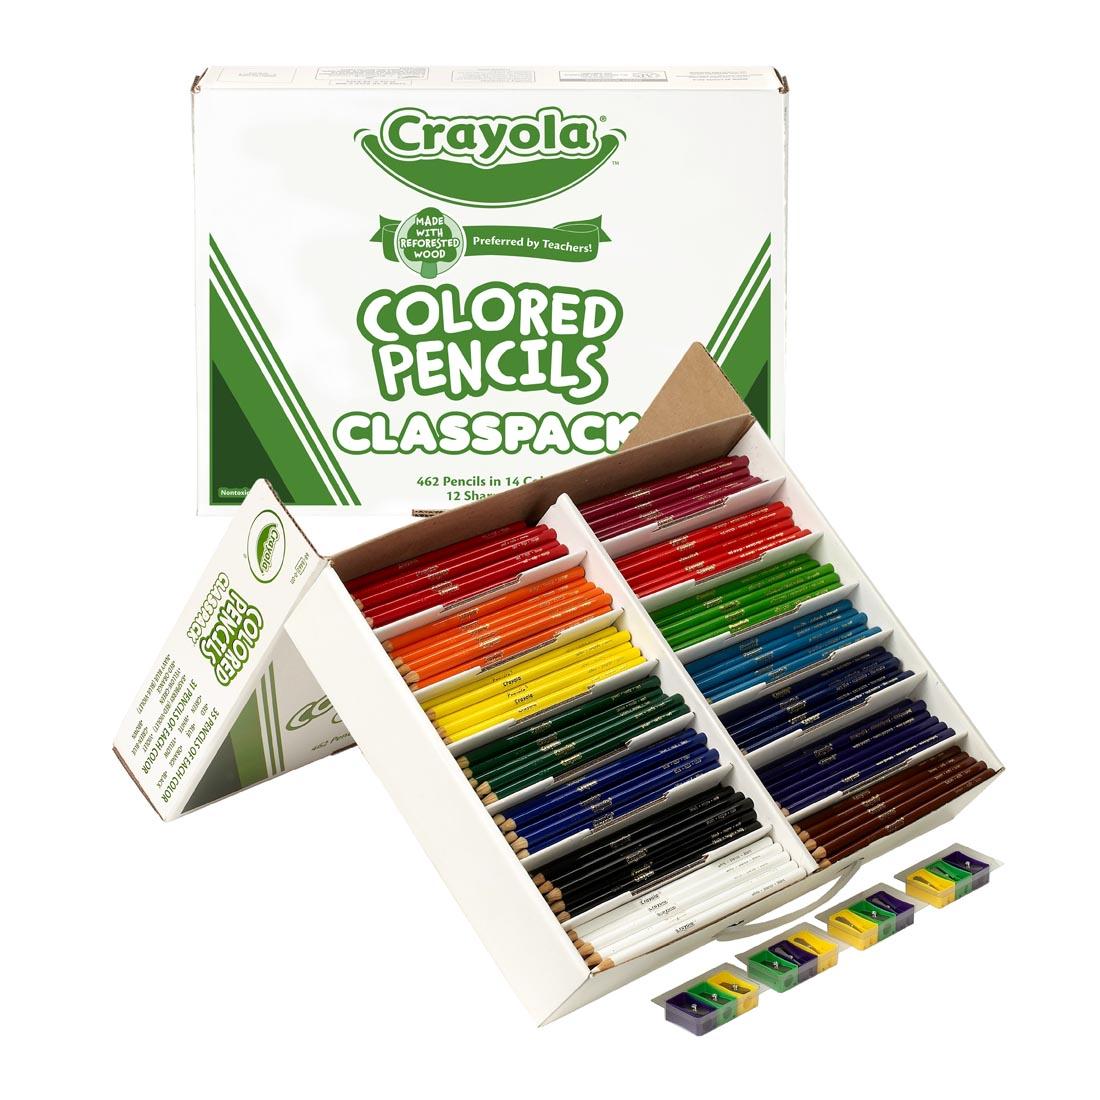 Crayola Colored Pencils 462-Count Classpack box shown closed and also open with pencil sharpeners